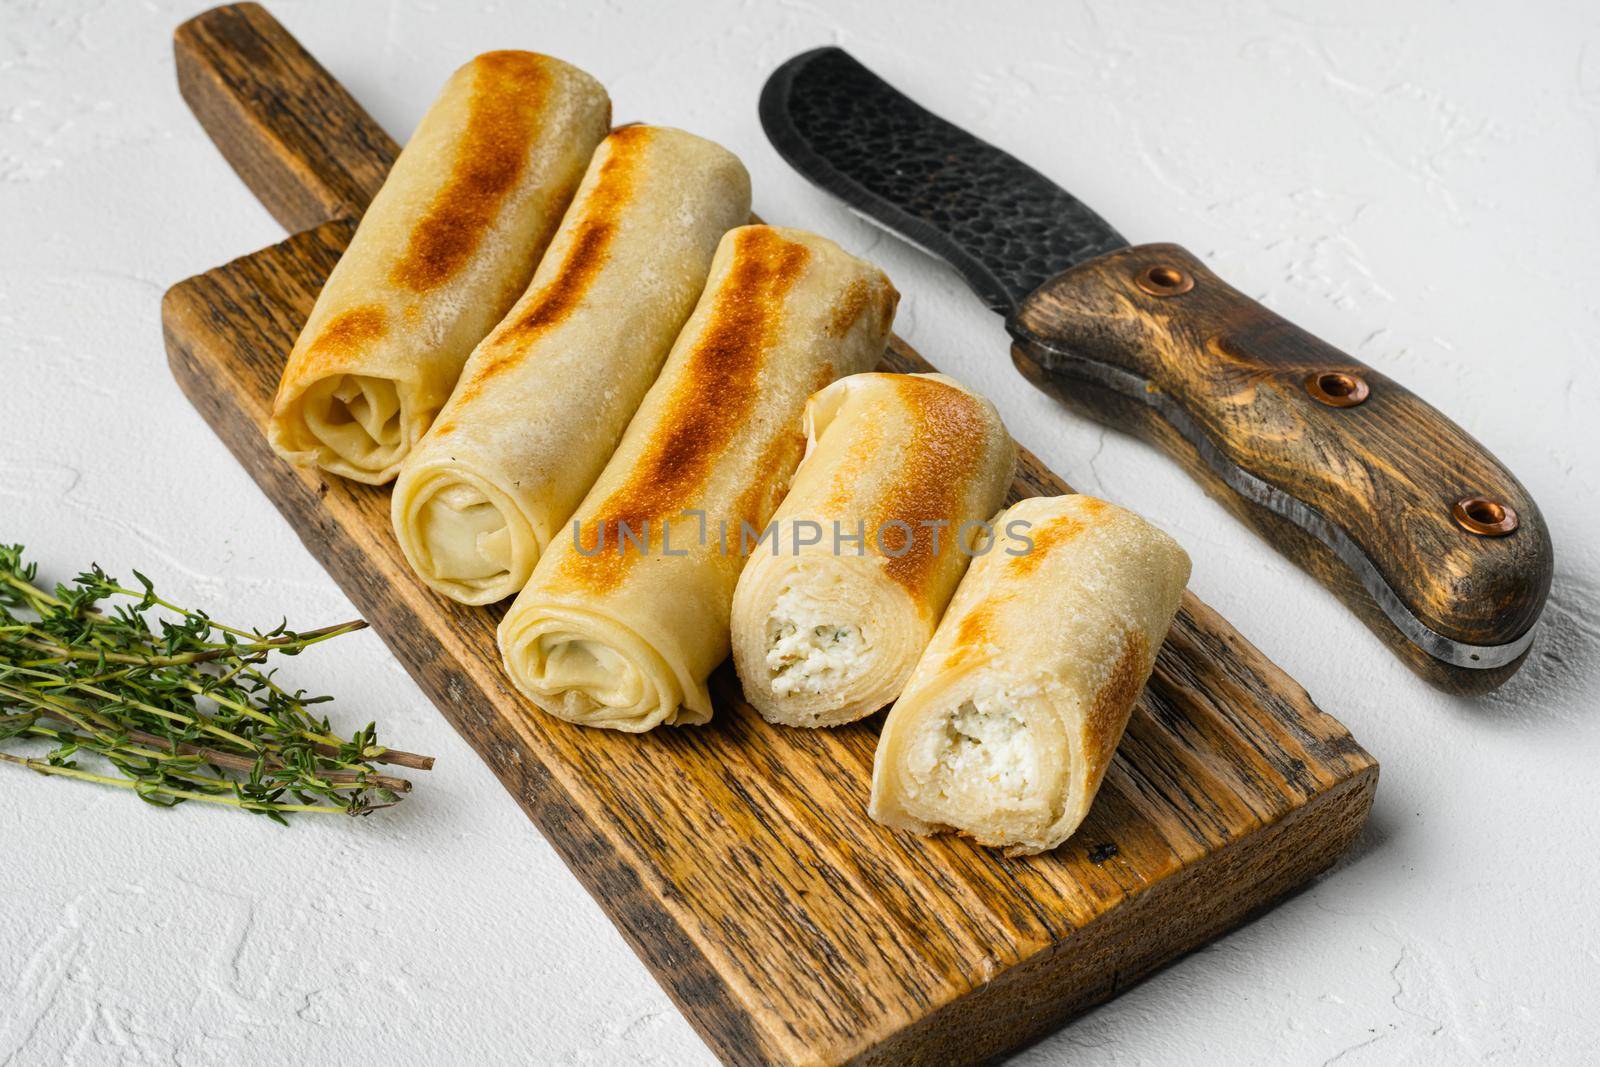 Fried georgian crepes stuffed with suluguni, on white stone table background